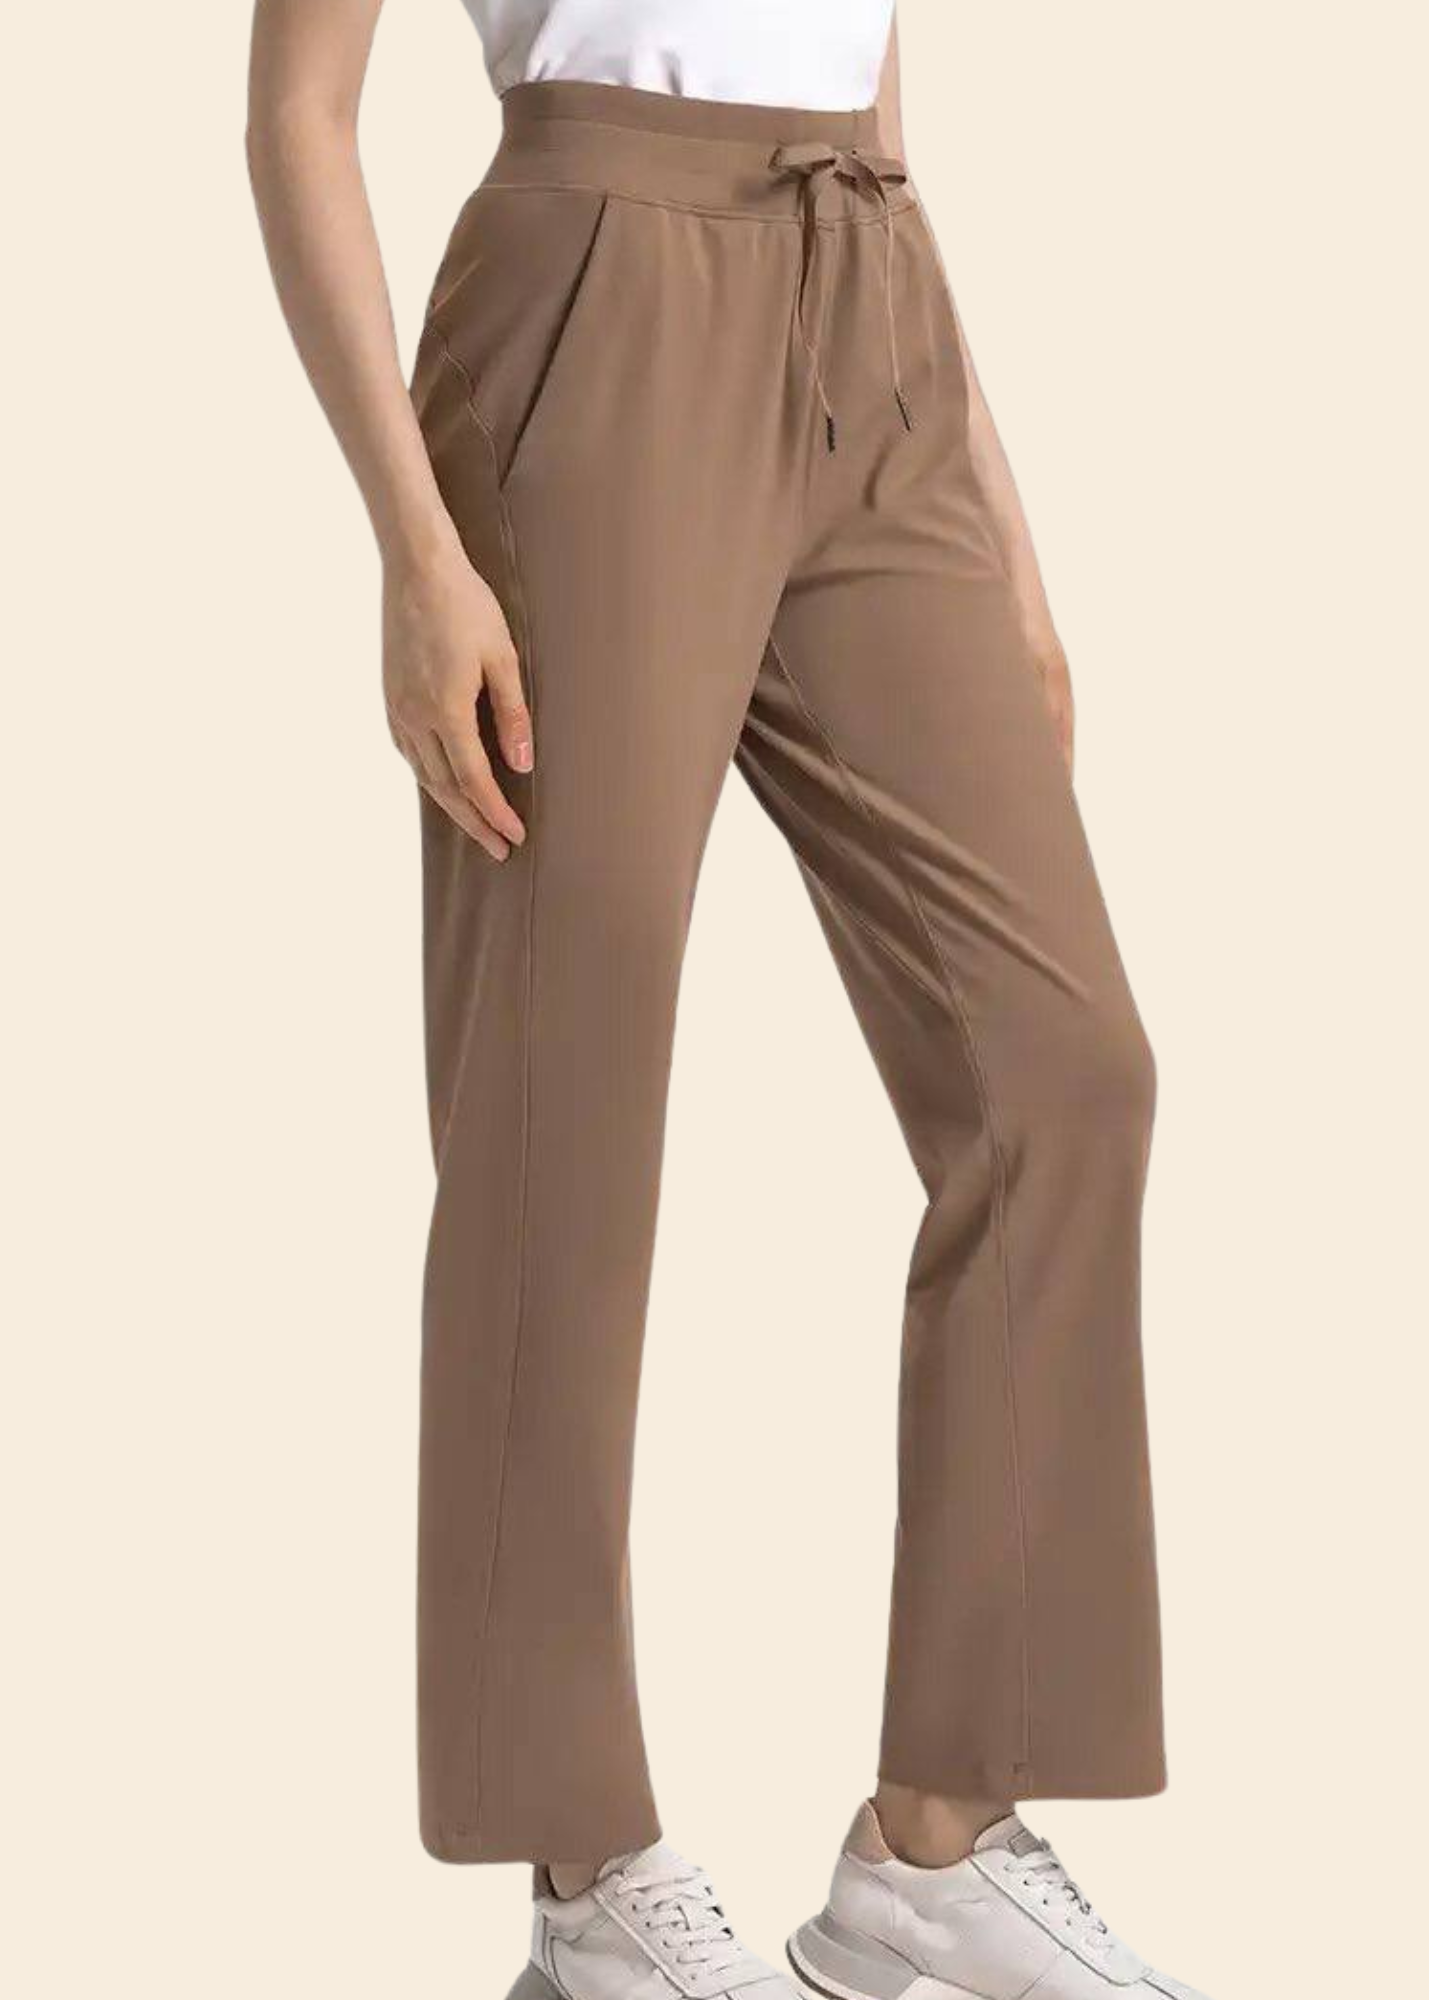 ALIGN PANTS IN COCO